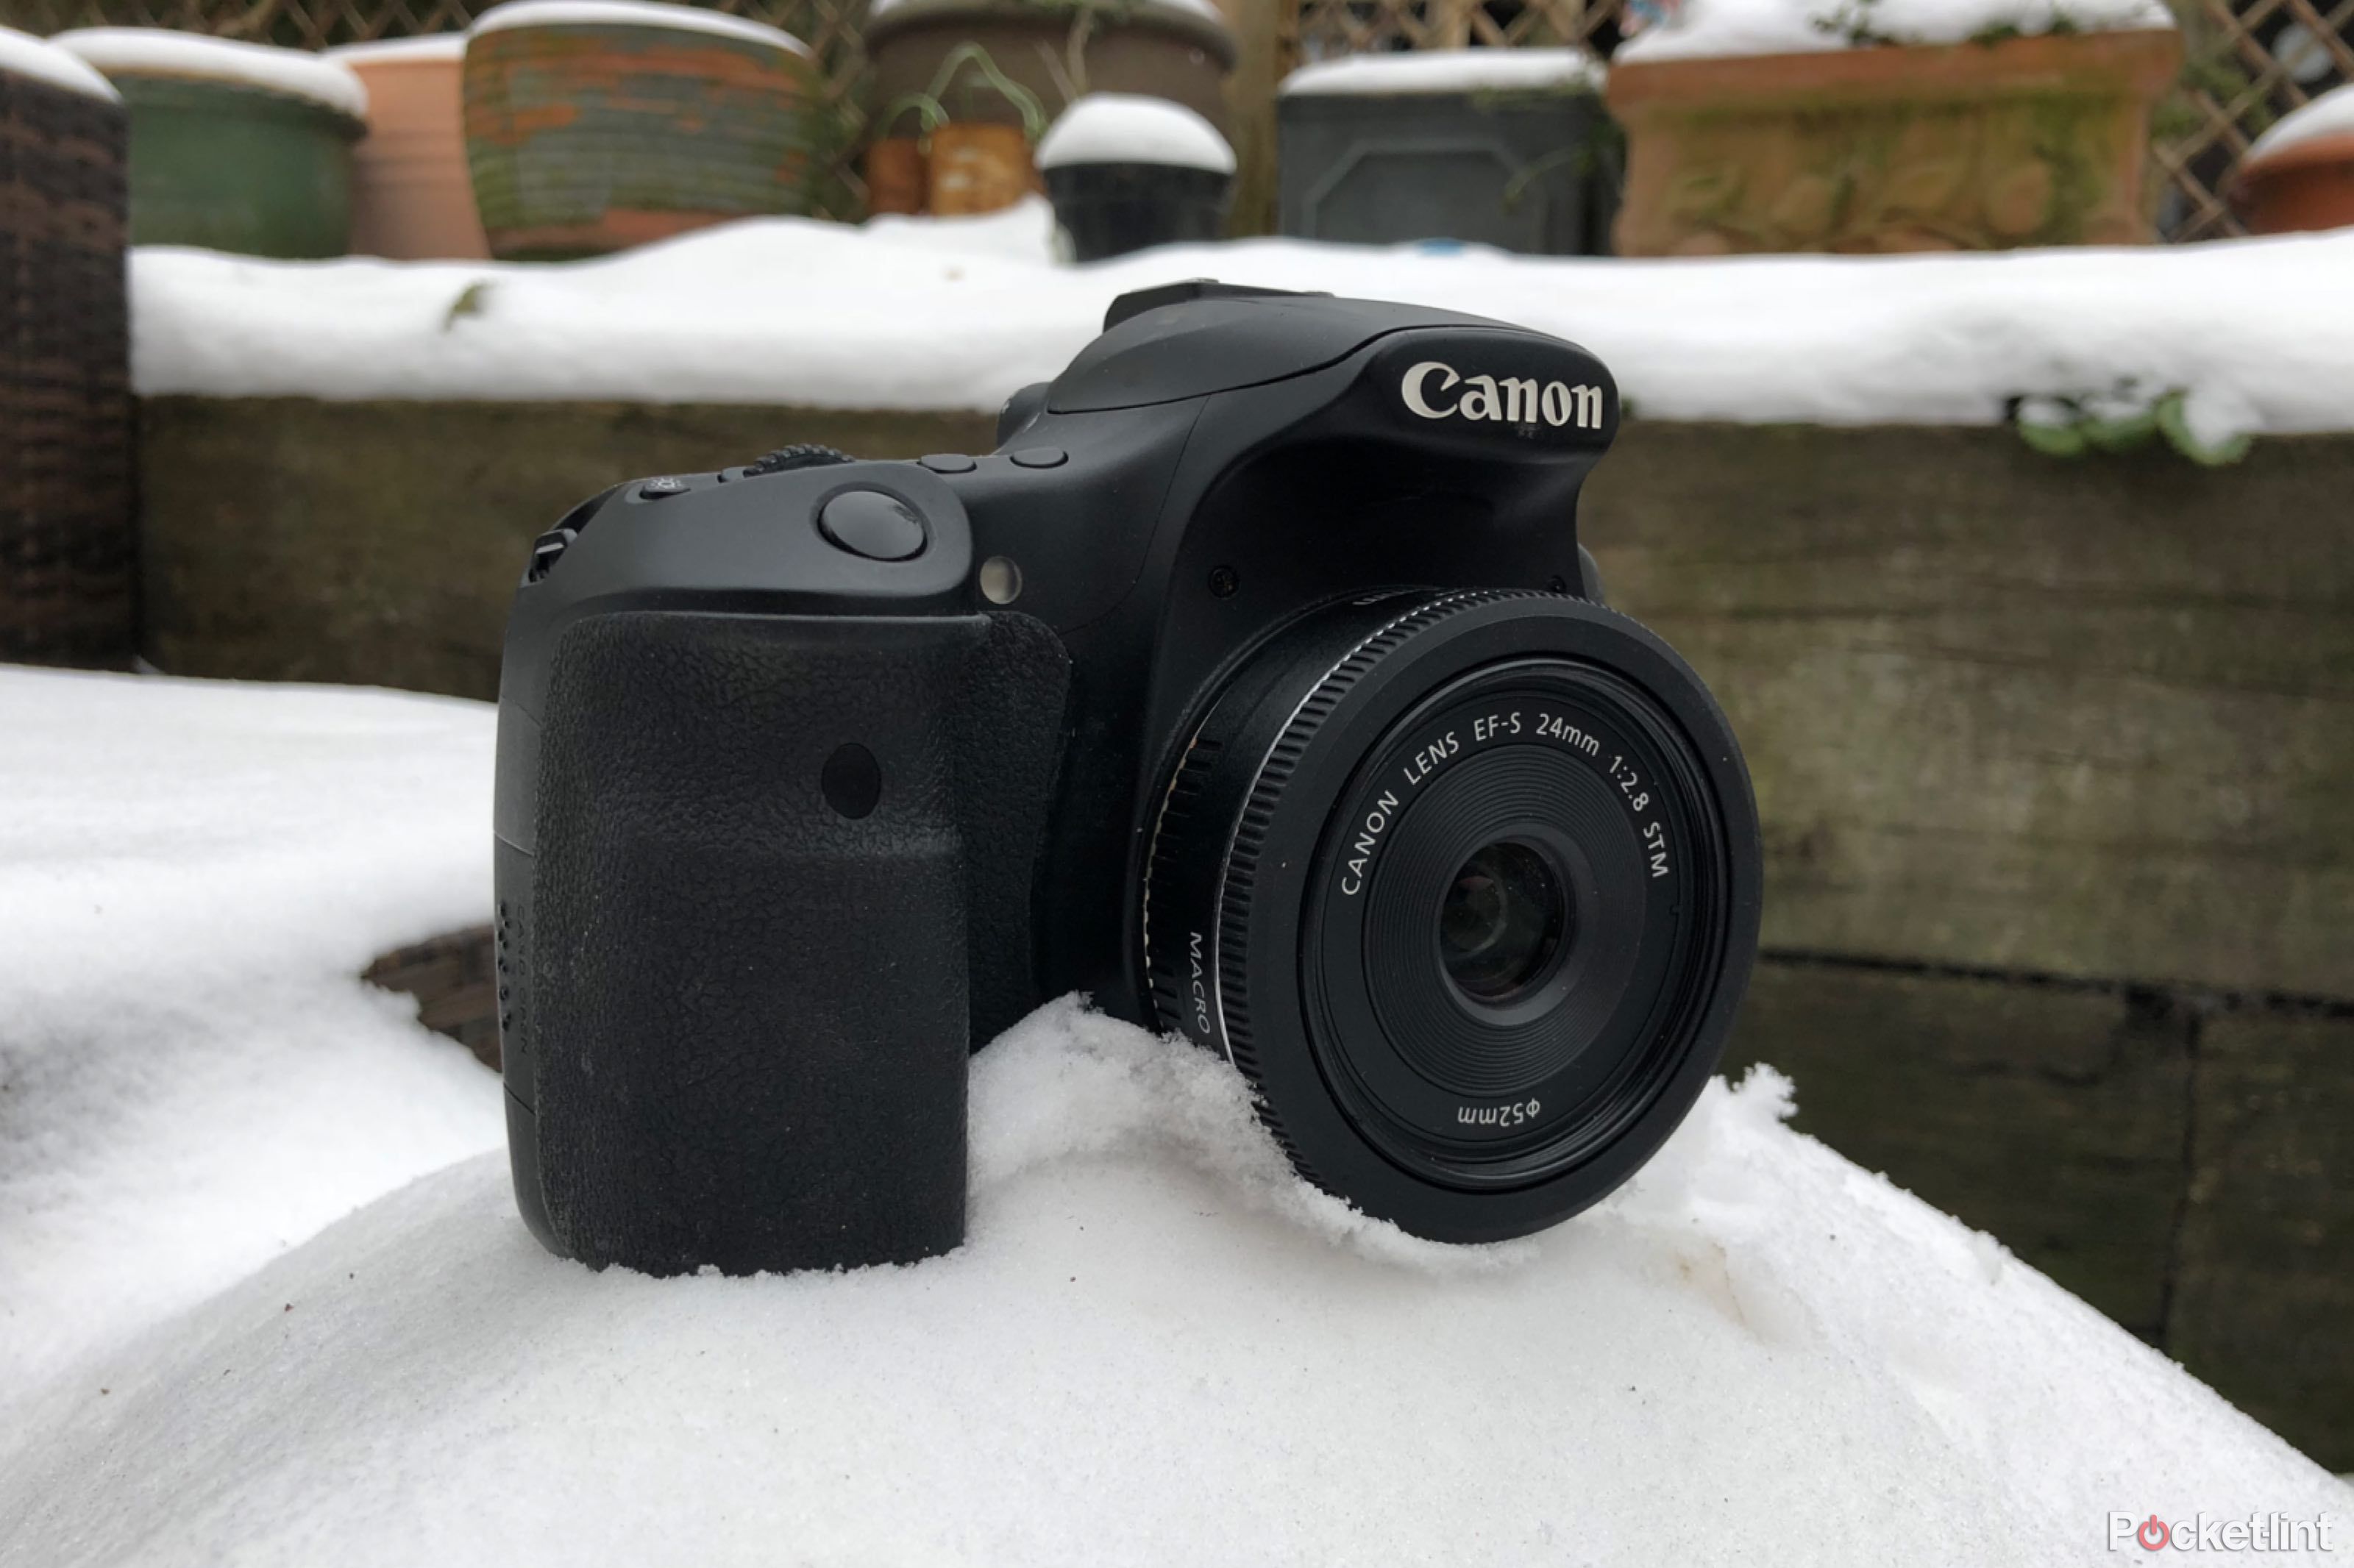 Snow Photos Top Tips For Taking Great Shots In The Snow image 6